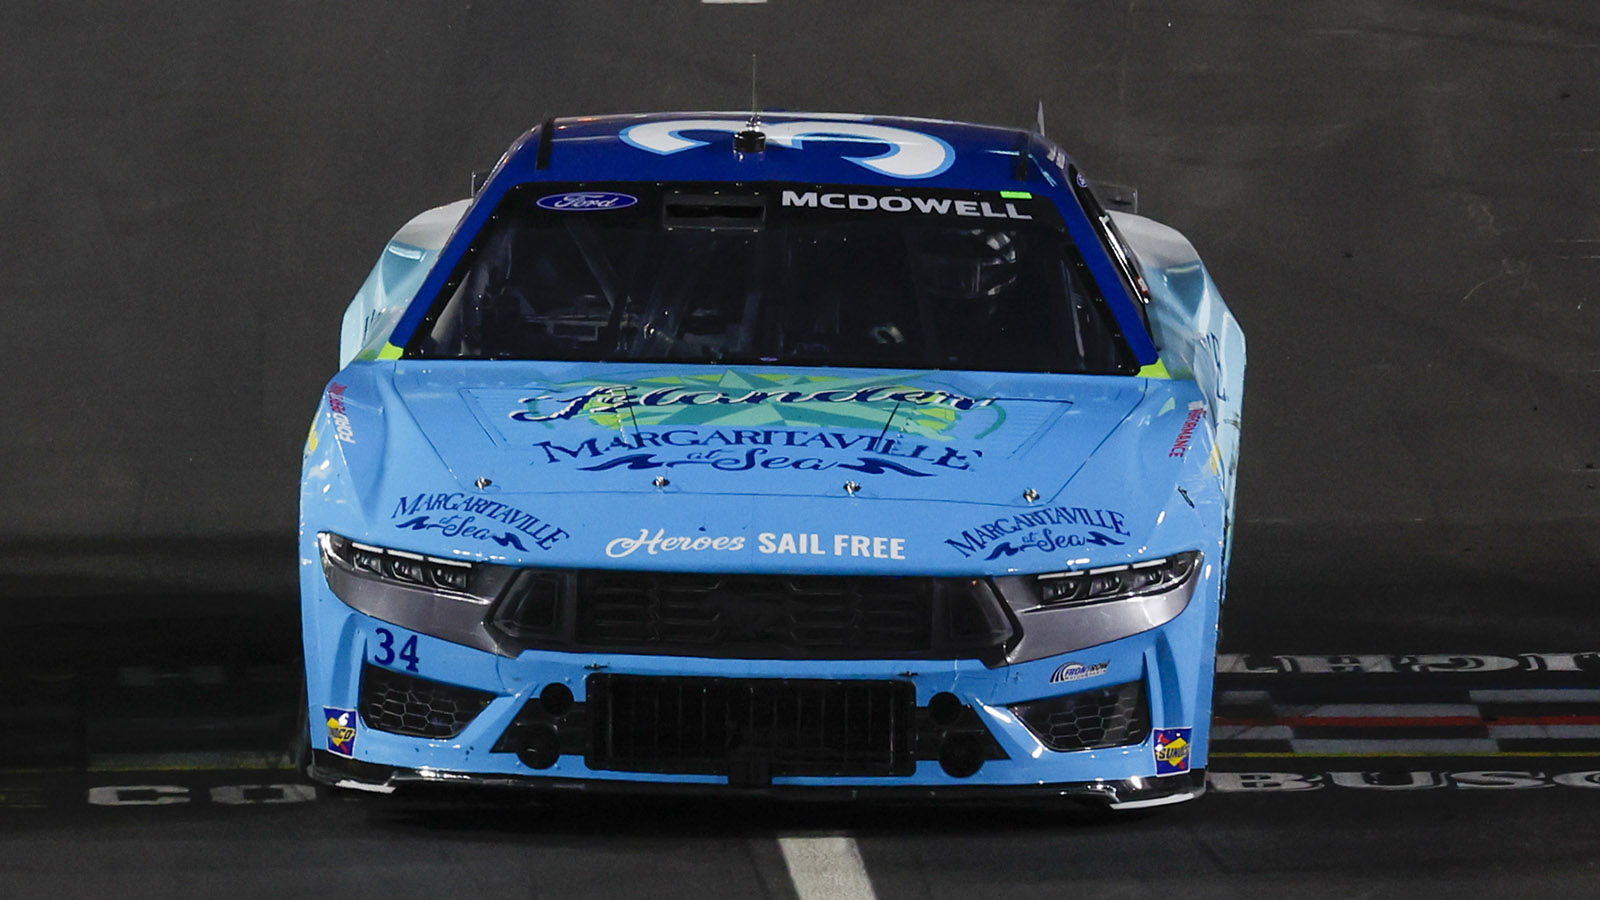 Michael McDowell 2024 Margaritaville at Sea paint scheme Front Row Motorsports NASCAR Cup Series